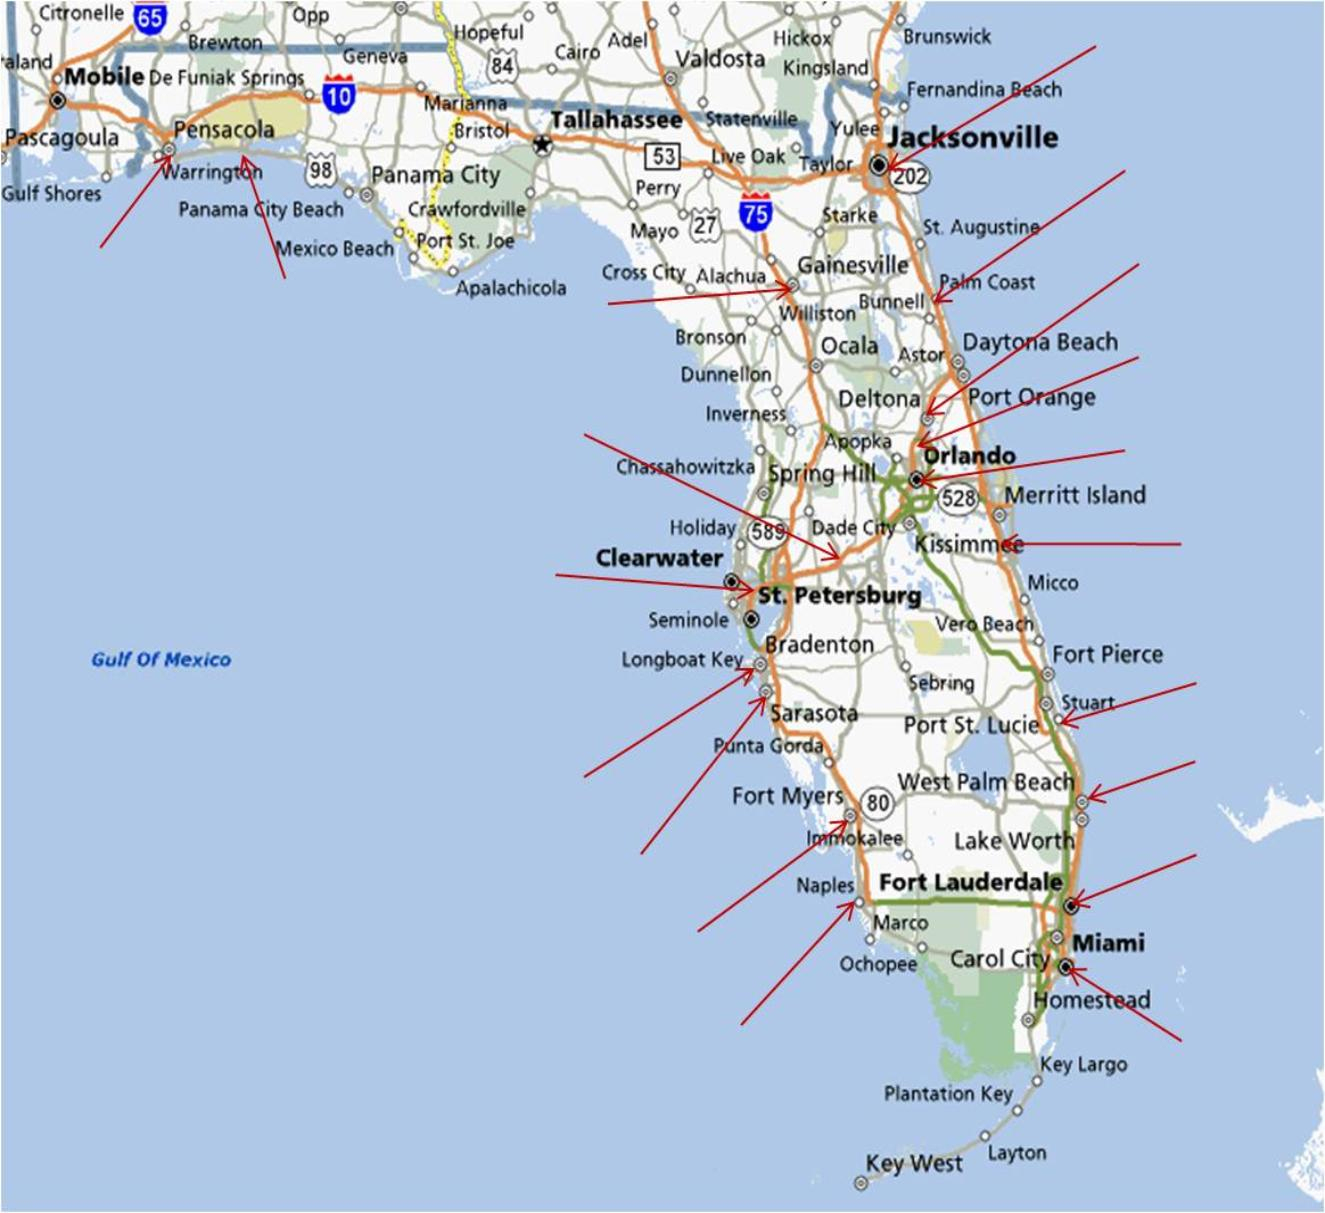 Map Of Eastern Fl And Travel Information | Download Free Map Of - Map Of Eastern Florida Beaches